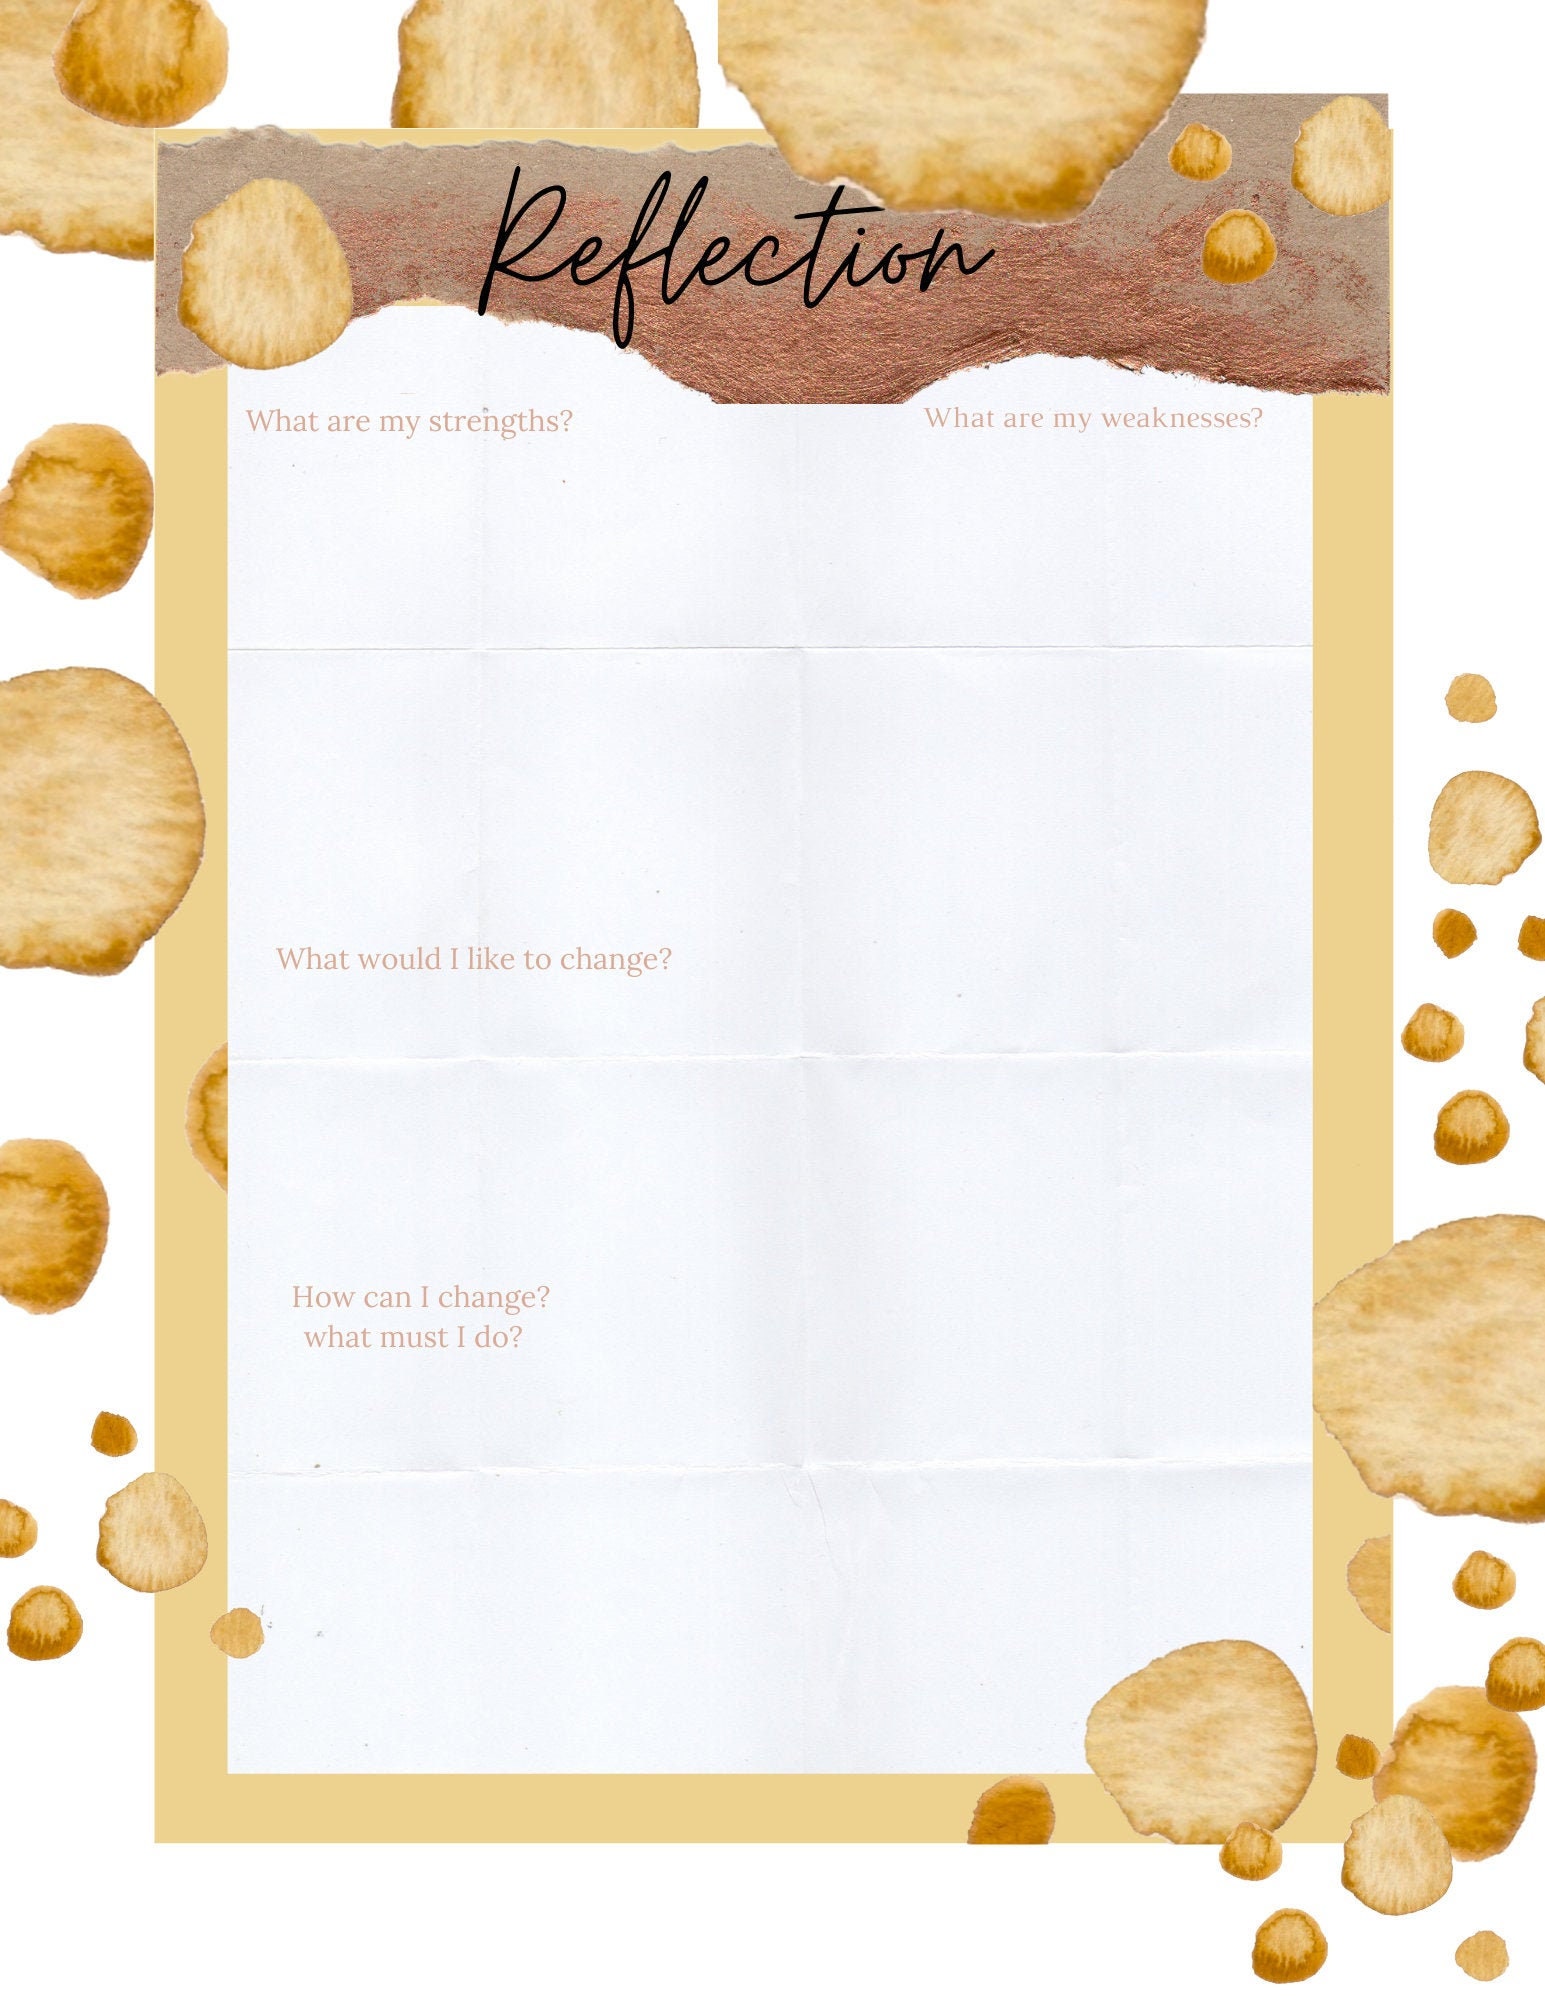 reflection-template-etsy